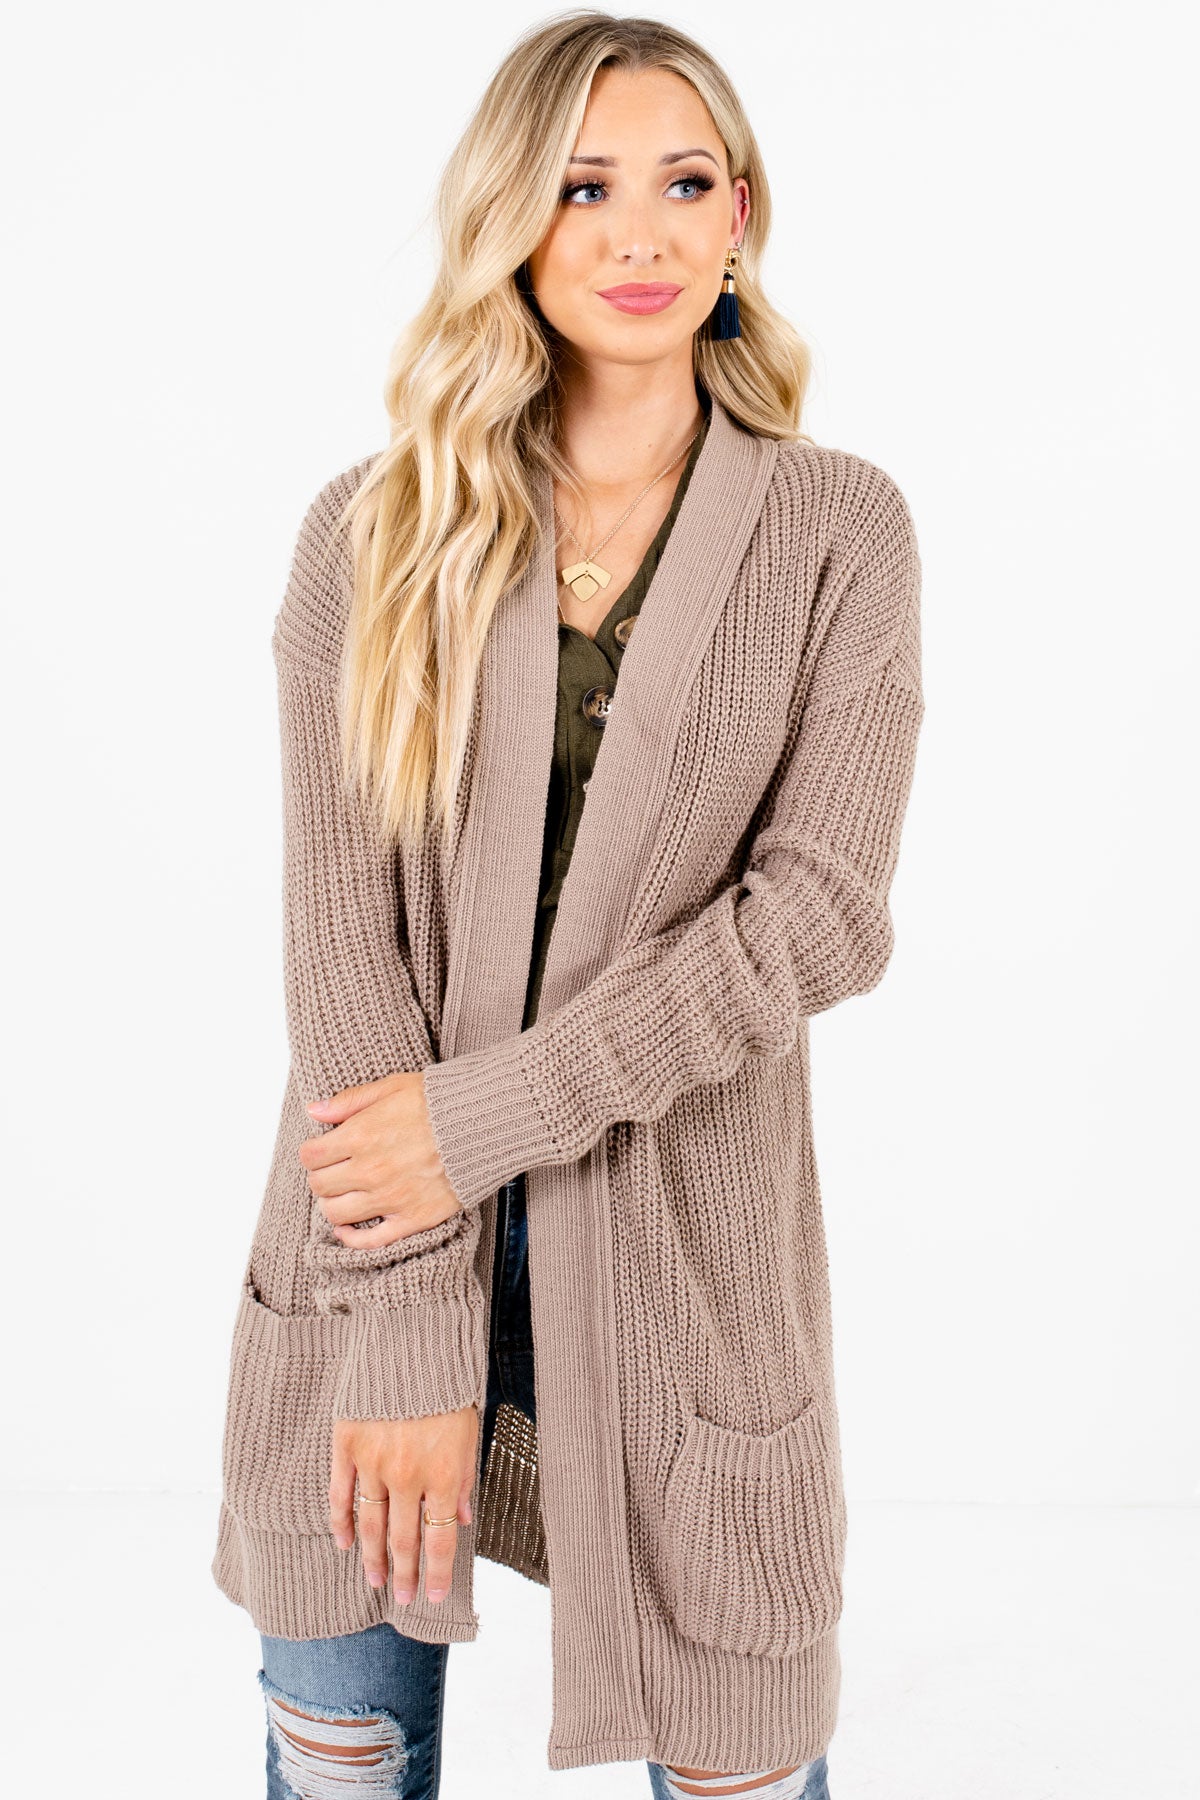 Women’s Taupe Brown Business Casual Boutique Cardigan